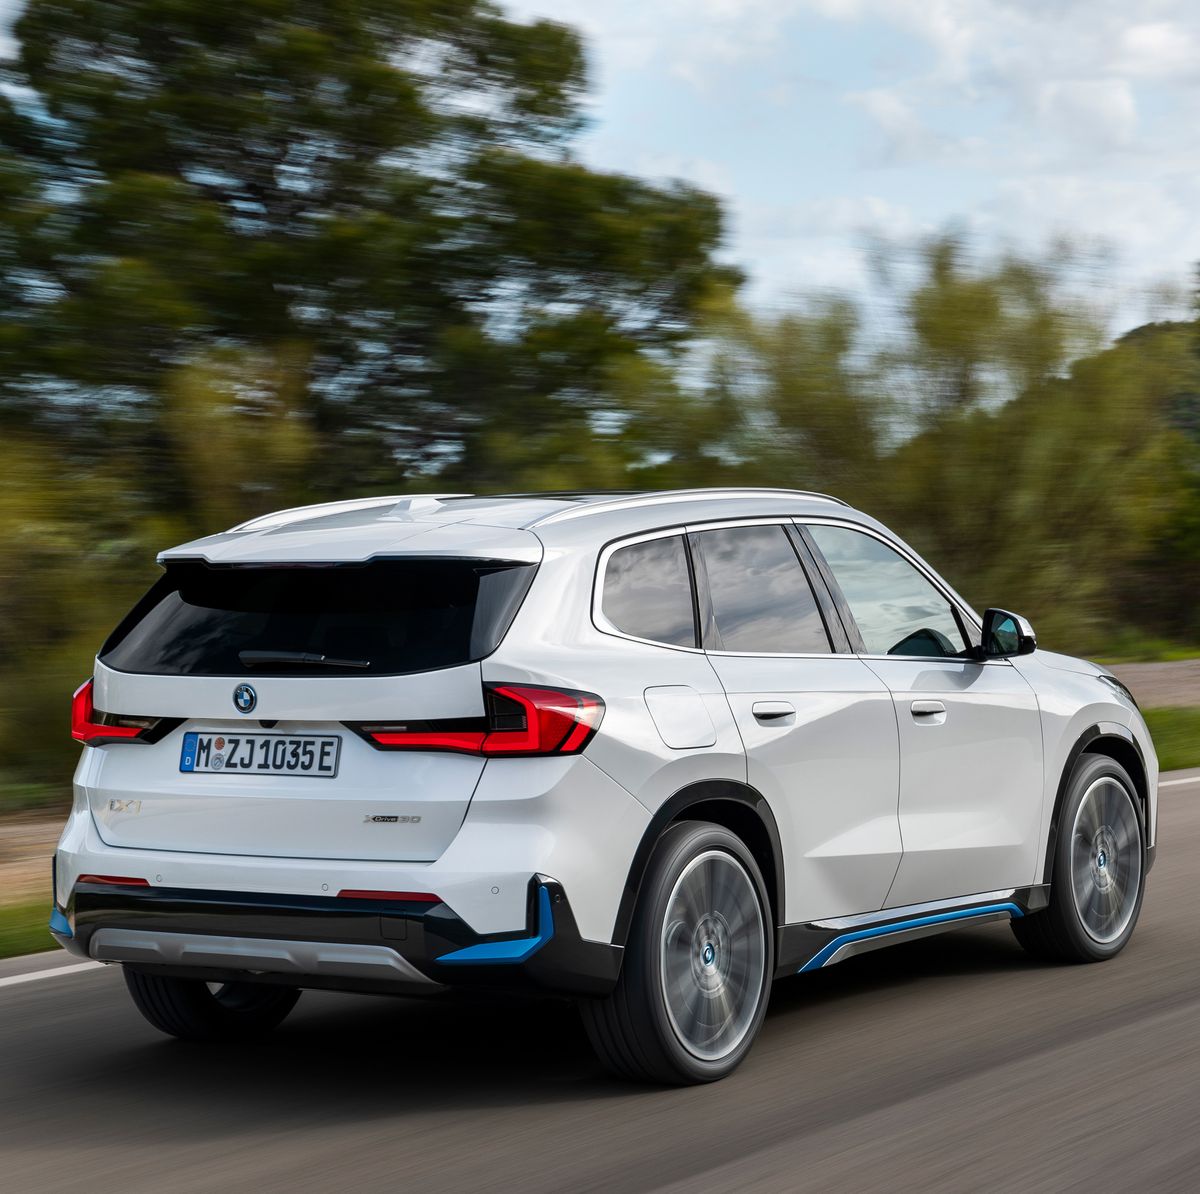 BMW X1 review: really quite average – the electric version even more so